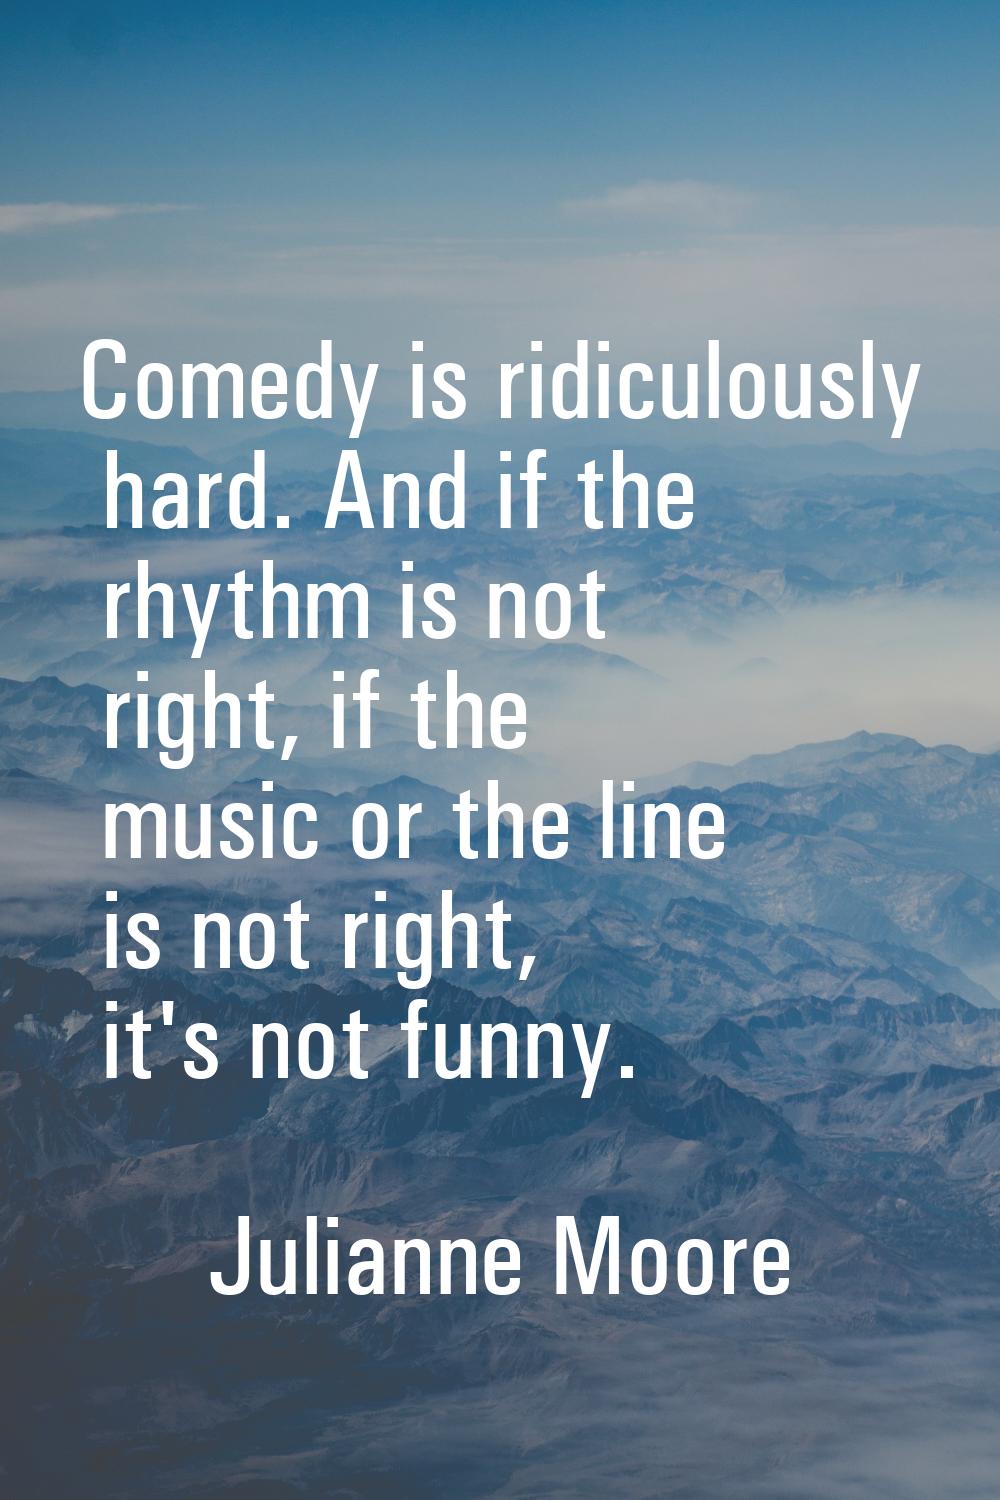 Comedy is ridiculously hard. And if the rhythm is not right, if the music or the line is not right,